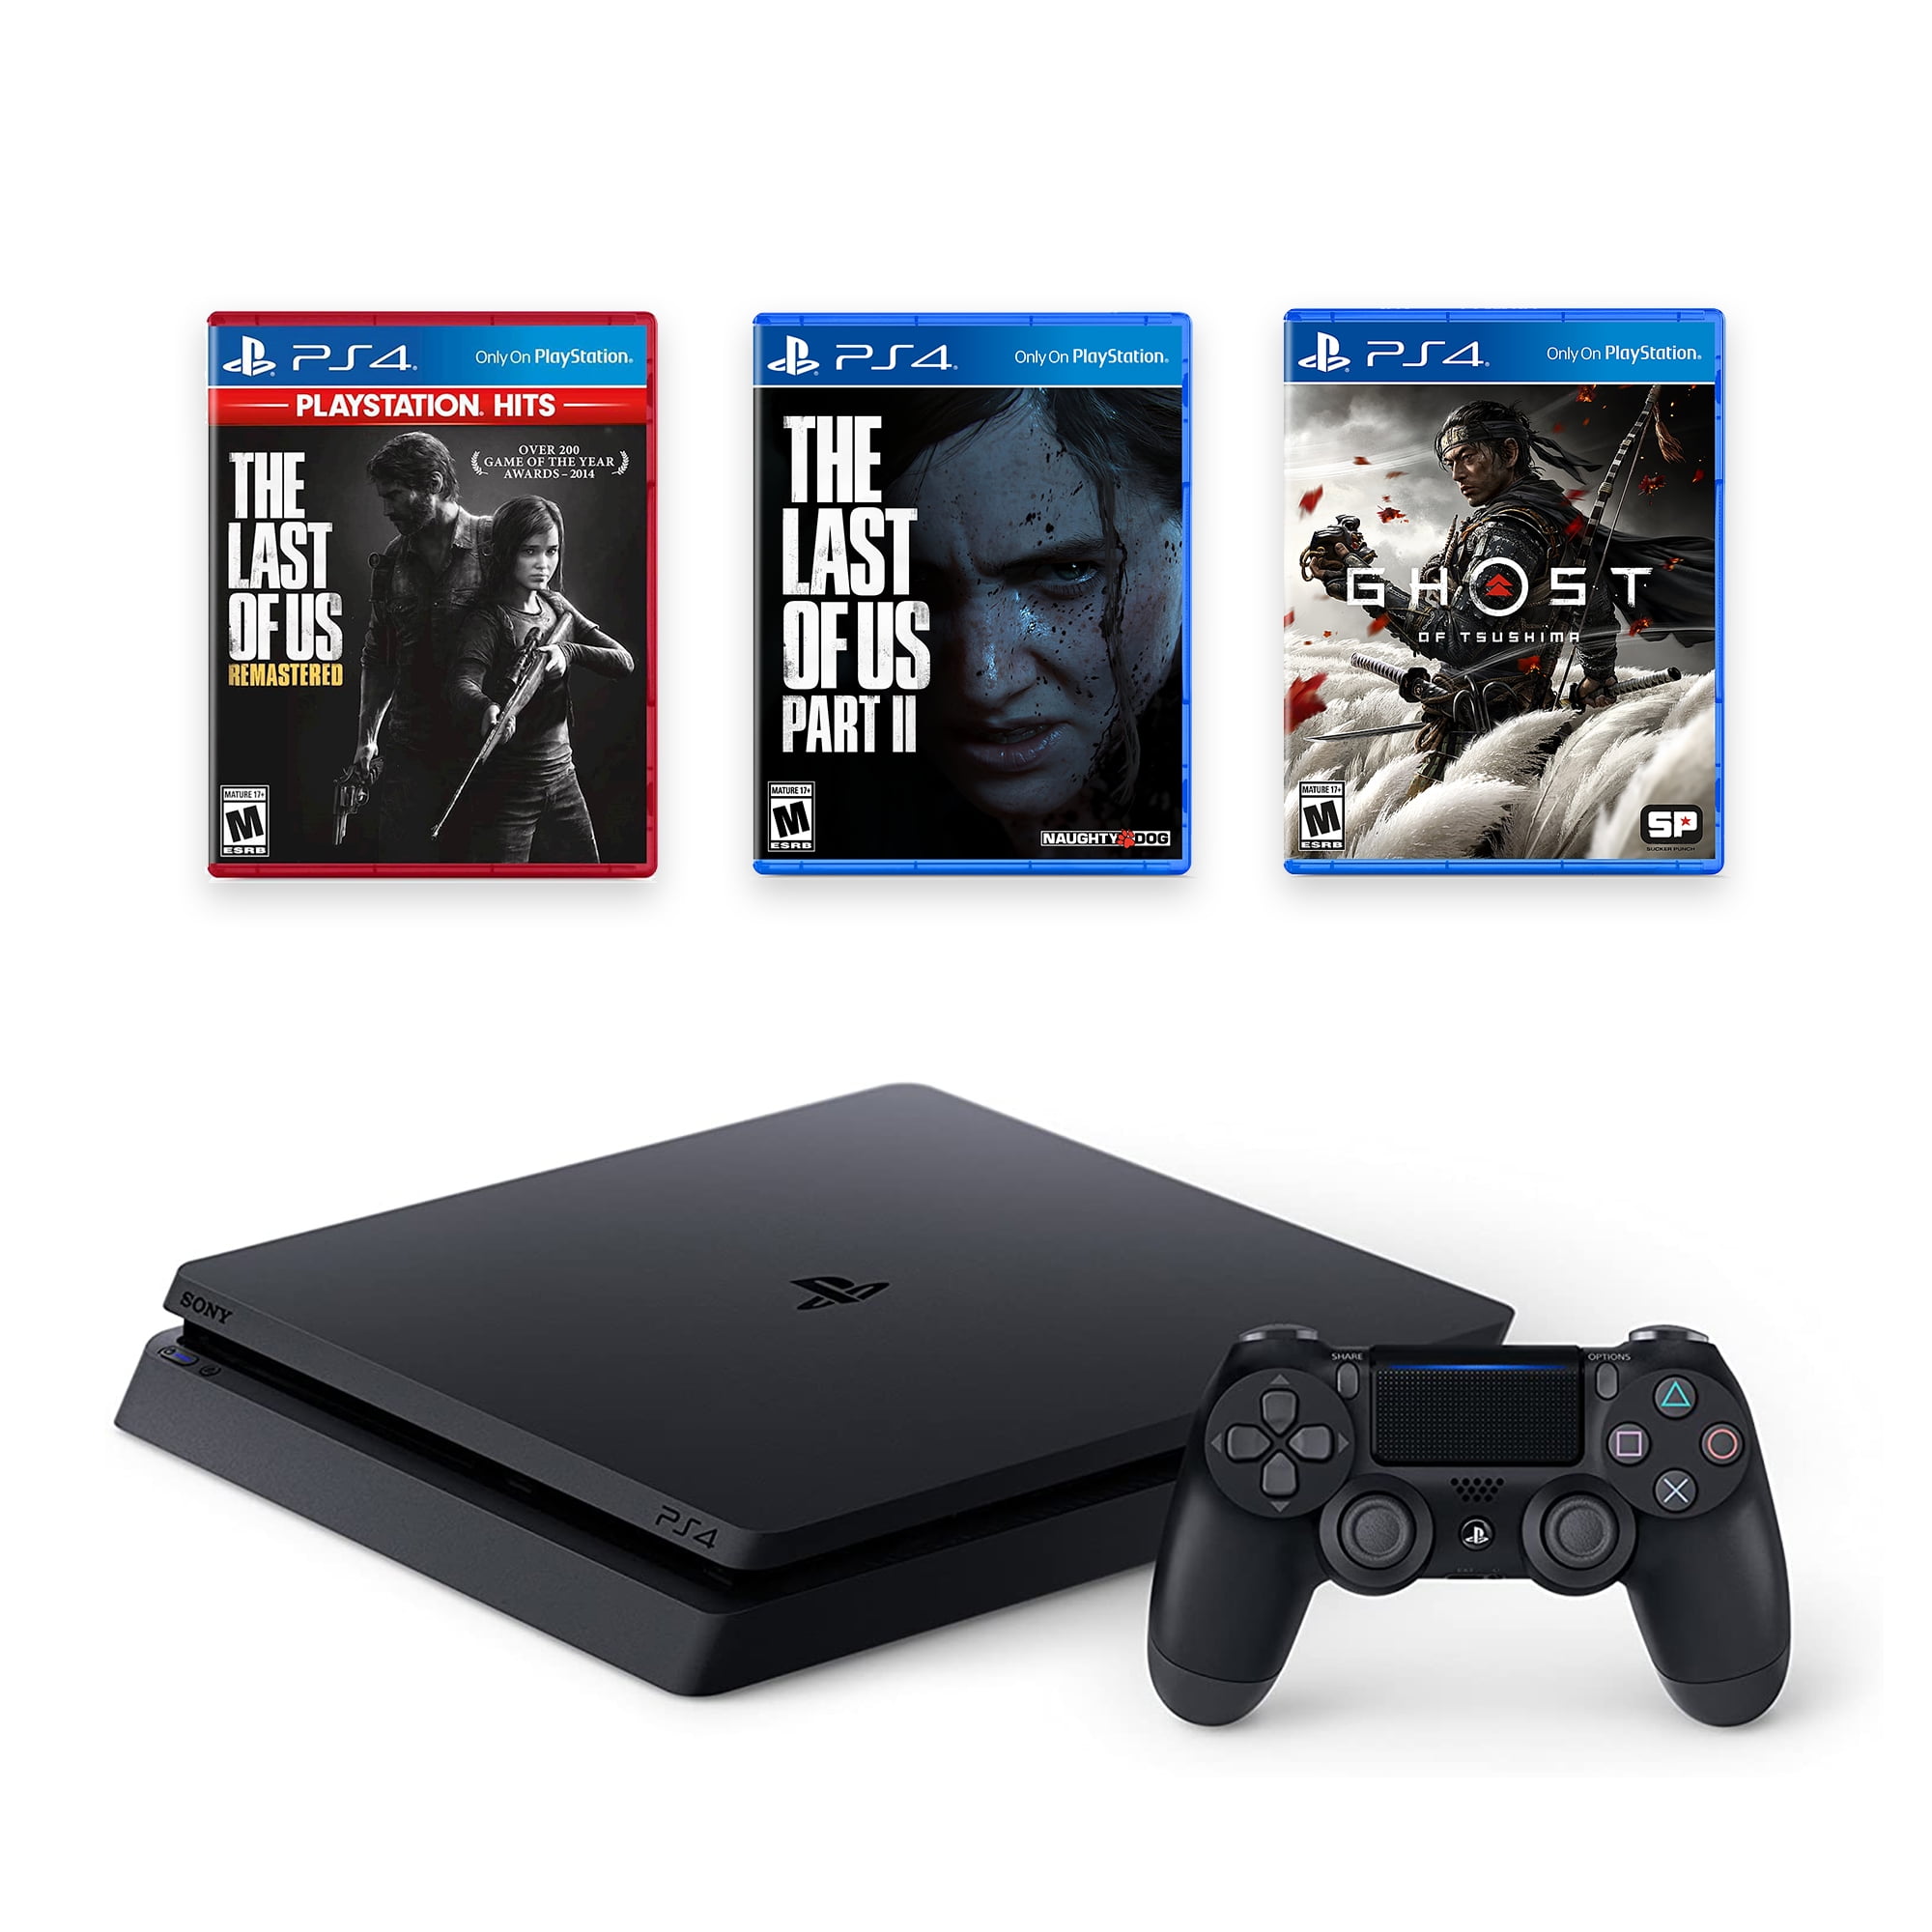 PlayStation 4 1TB Console with The Last of and Ghost of Tsushima - PS4 Slim 1TB Jet Black HDR Gaming Console, Wireless Controller and Games - Walmart.com